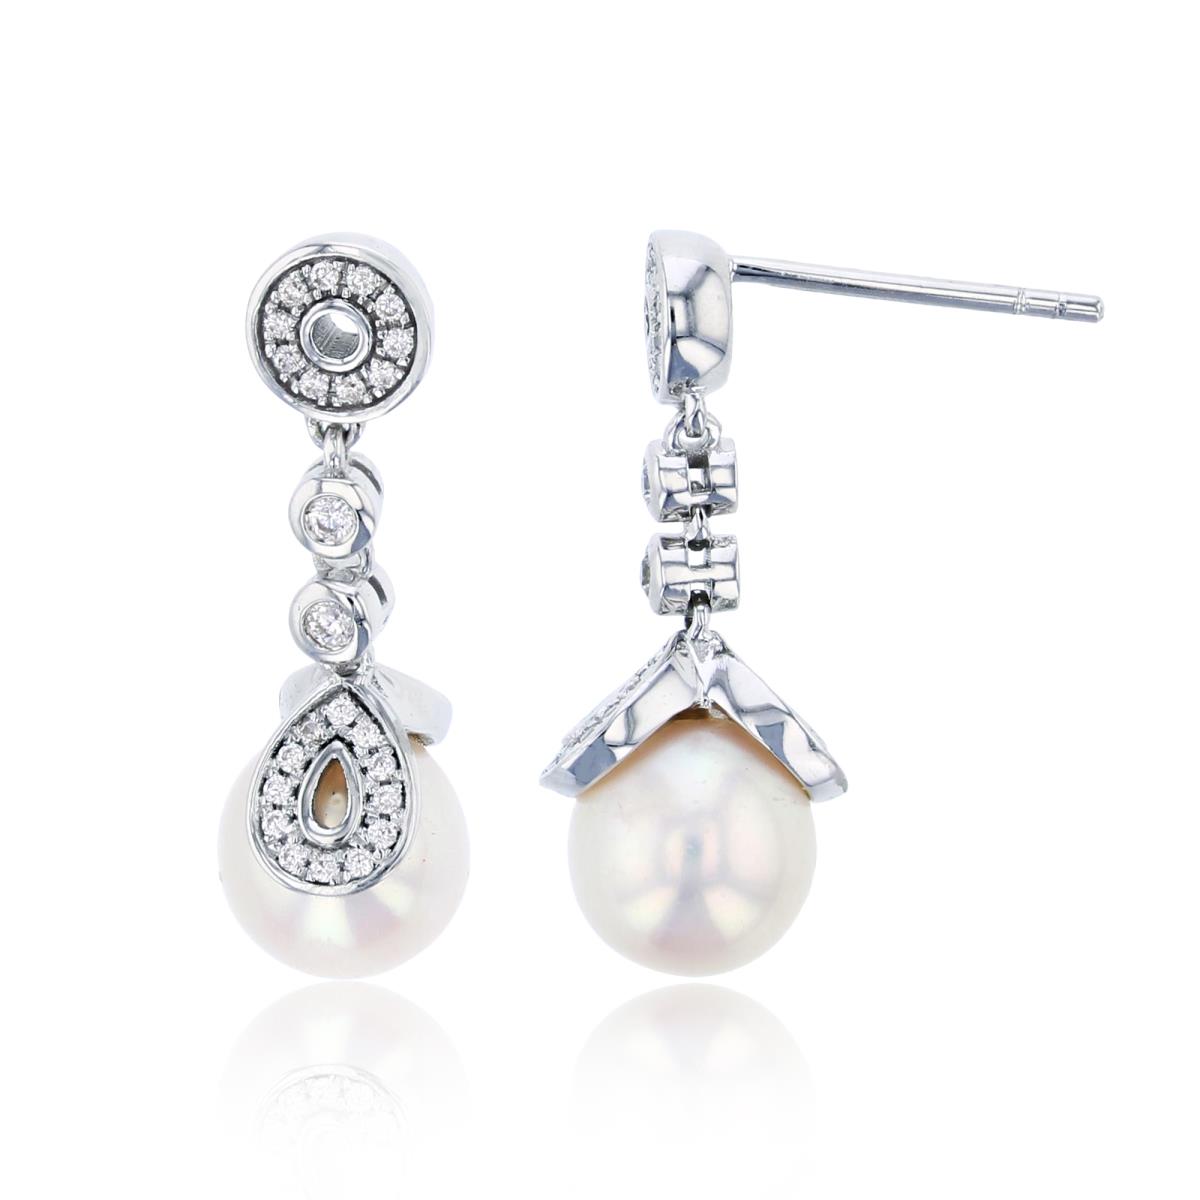 14K White Gold 0.24 CTTW Rnd Diam & 7mm Rnd White Pearl with Leaves Dangling Earring